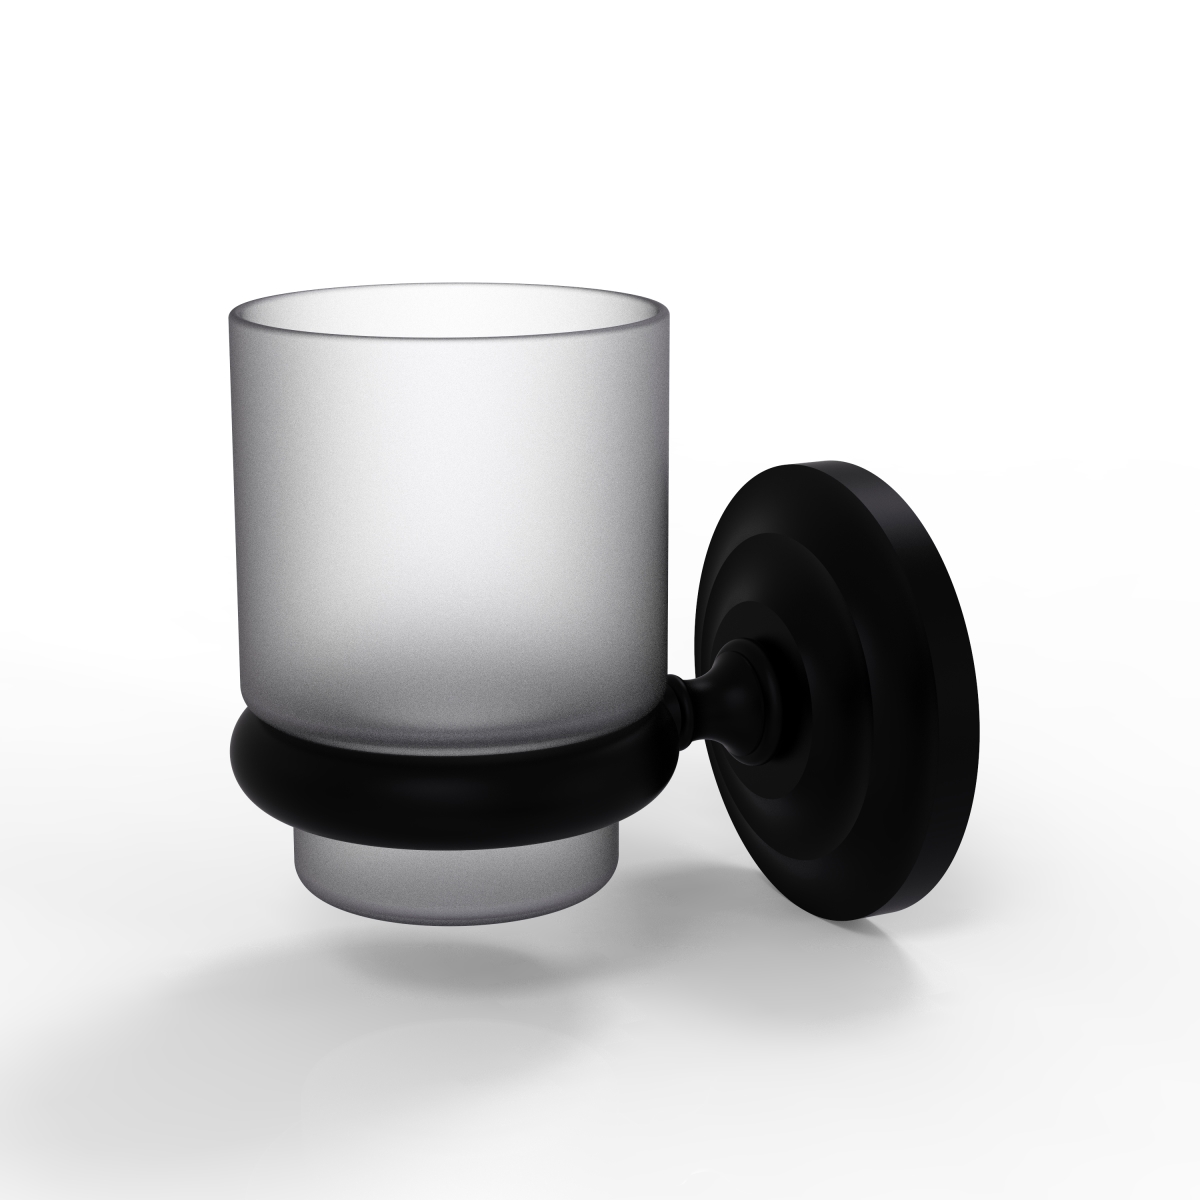 Pqn-64-bkm Prestige Que New Collection Wall Mounted Votive Candle Holder, Matte Black